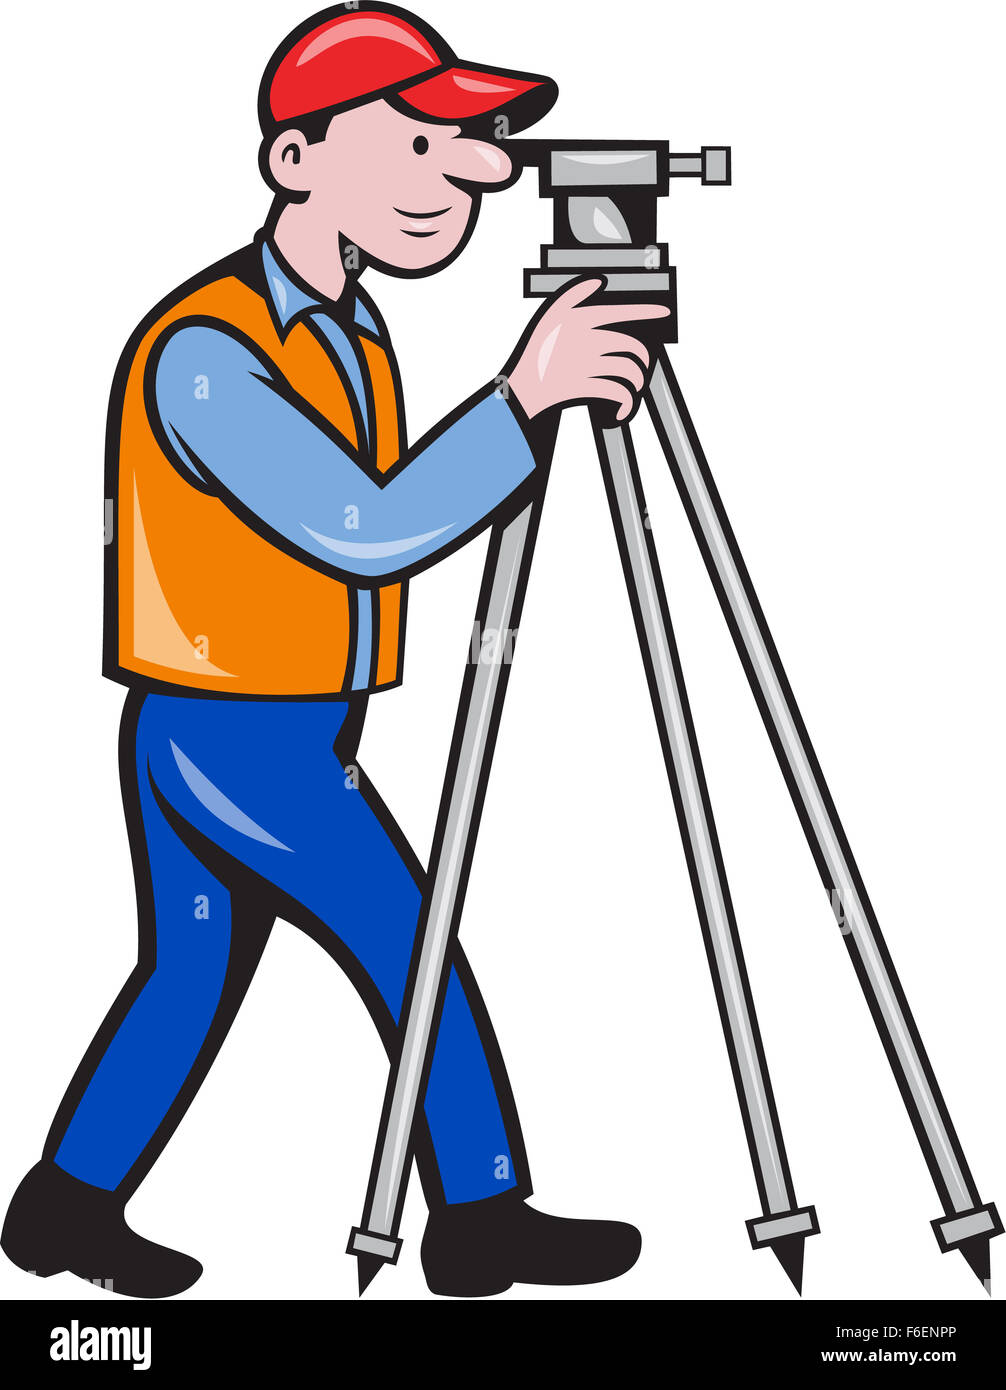 Illustration of a surveyor geodetic engineer looking through theodolite instrument surveying viewed from side set on isolated white background done in cartoon style. Stock Photo